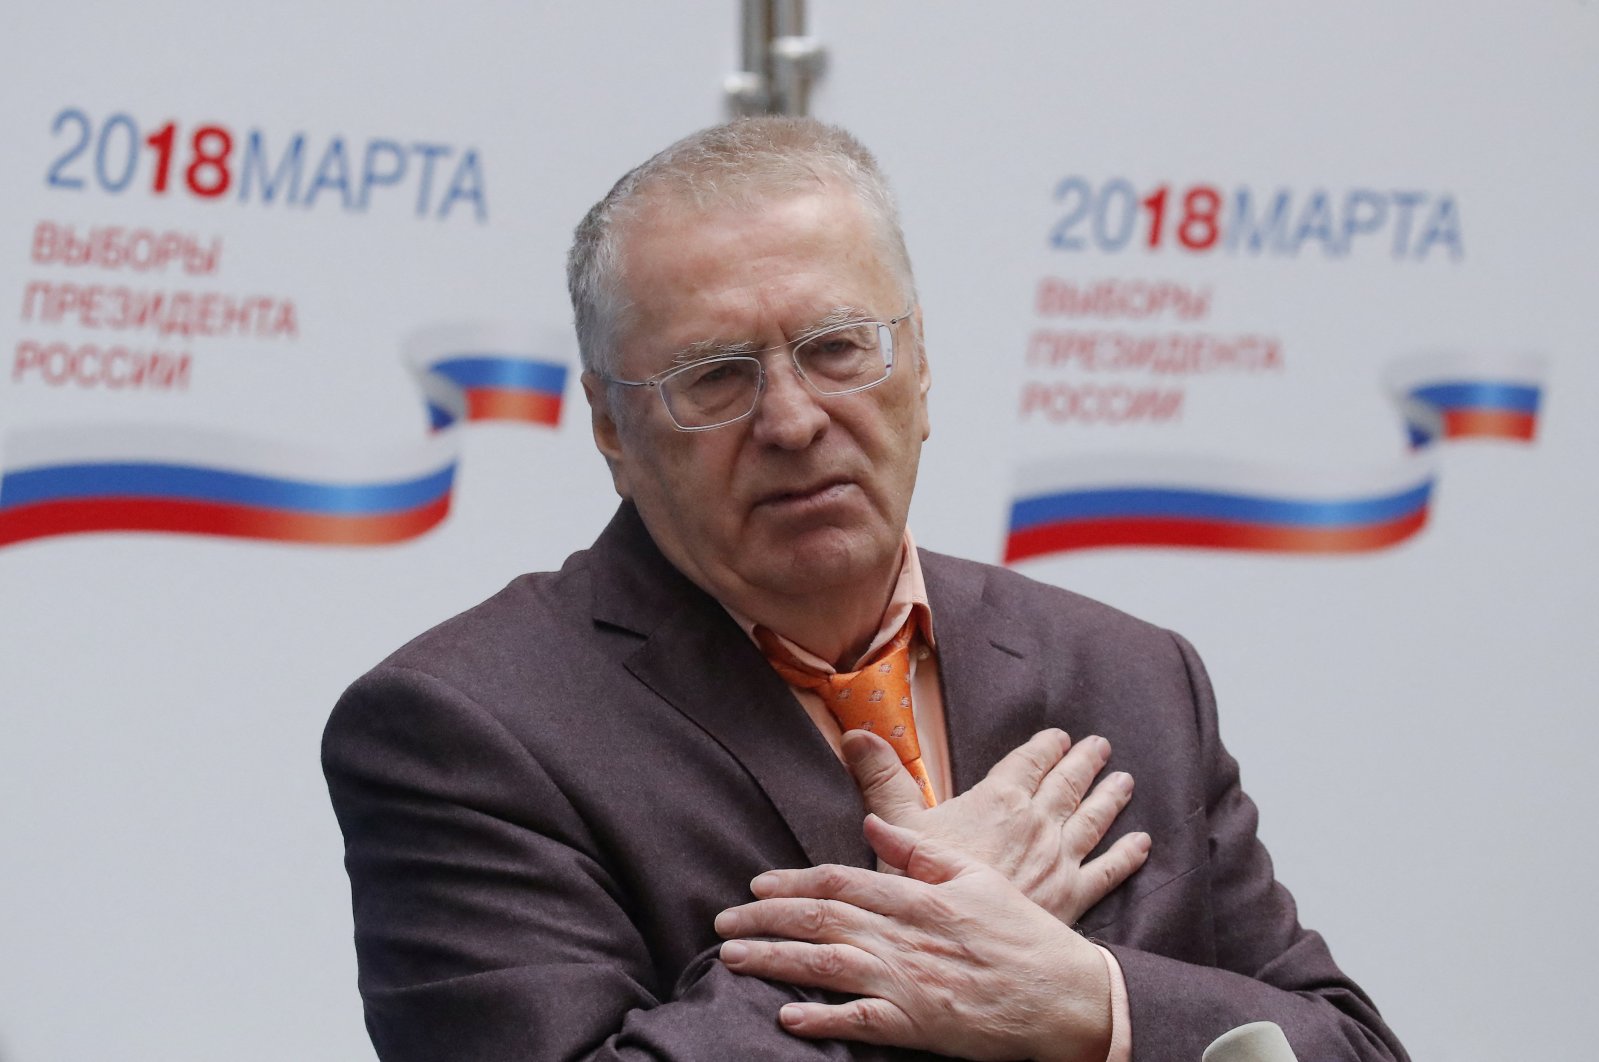 Vladimir Zhirinovsky, leader of the Liberal Democratic Party of Russia (LDPR) and candidate in the upcoming presidential election, addresses the media as he visits the headquarters of the Russian Central Election Commission in Moscow, Russia March 5, 2018. (Reuters Photo)